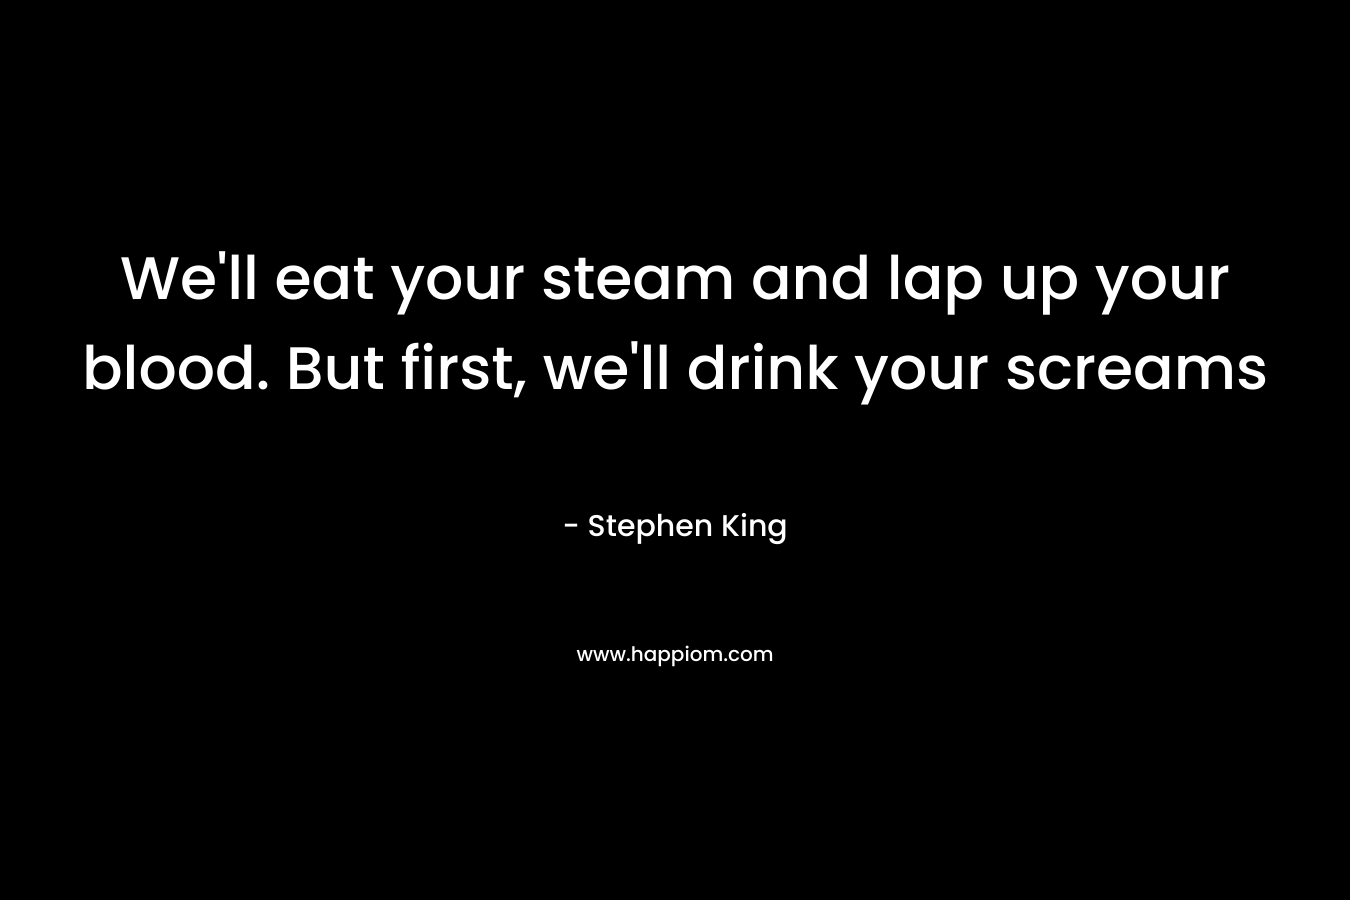 We’ll eat your steam and lap up your blood. But first, we’ll drink your screams – Stephen King